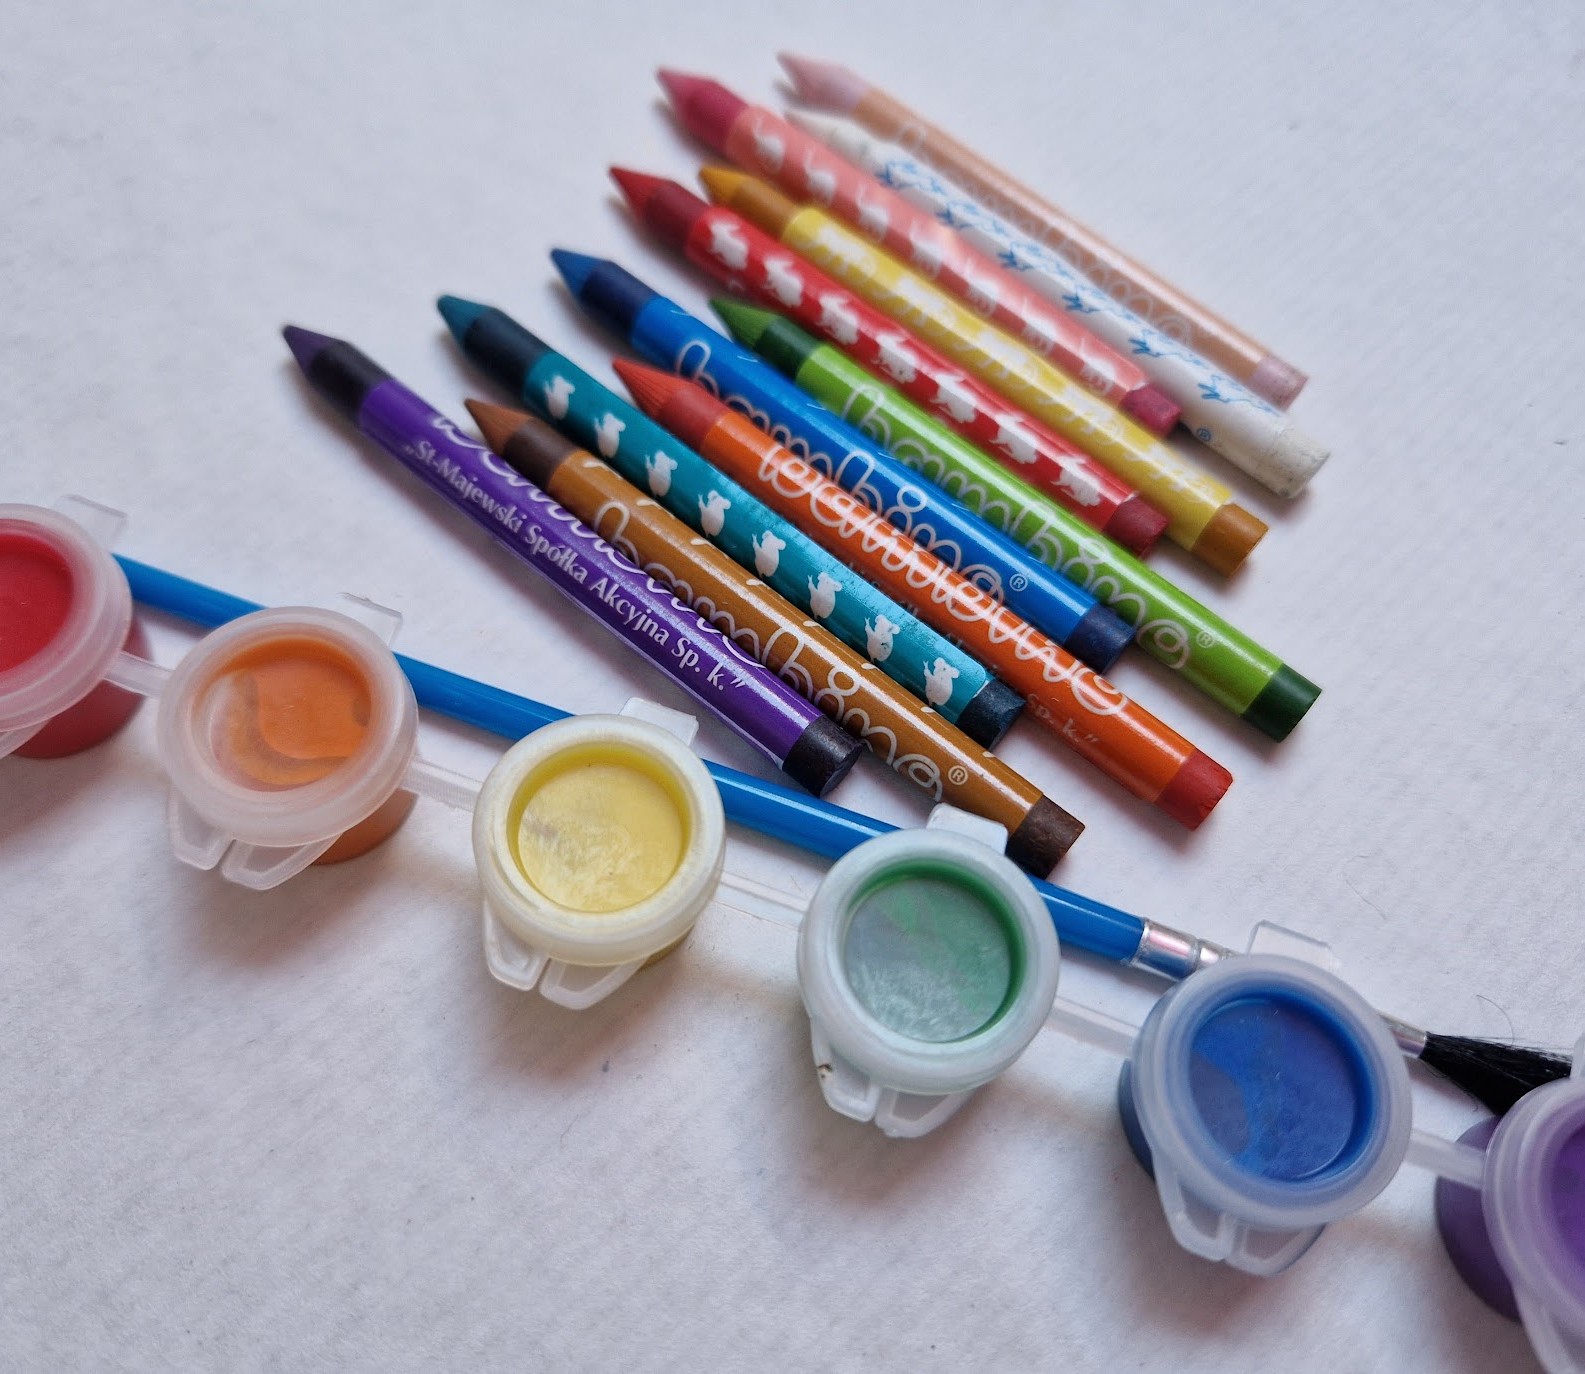 Rainbow coloured crayons and paints with a paint brush.